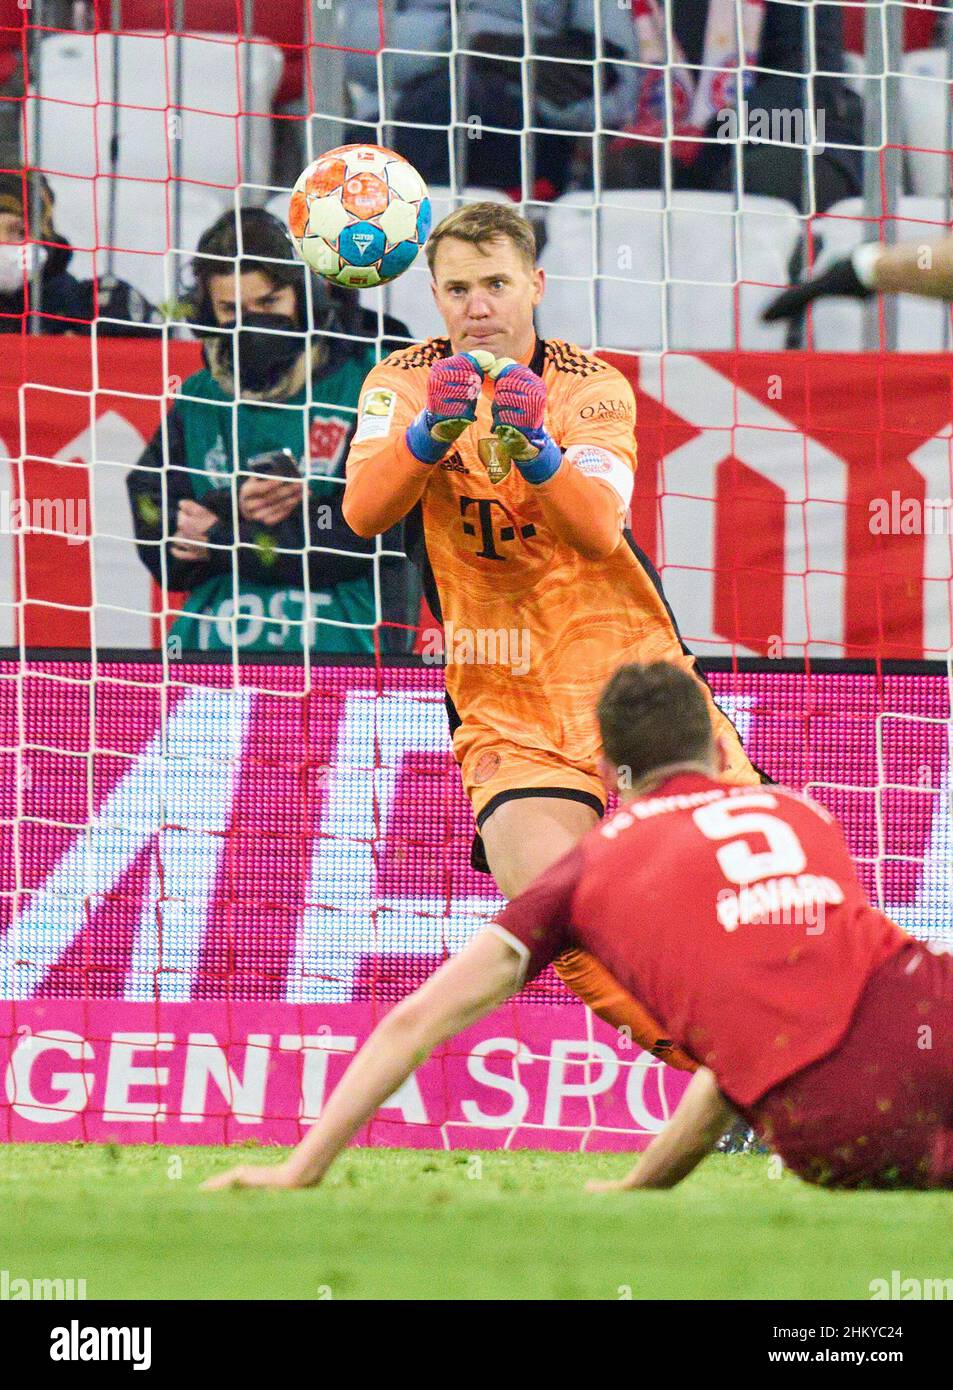 Manuel NEUER, goalkeeper FCB 1 defend in the match FC BAYERN MÜNCHEN - RB LEIPZIG 1.German Football League on Feb 5, 2022 in Munich, Germany. Season 2021/2022, matchday 21, 1.Bundesliga, FCB, München, 21.Spieltag. FCB © Peter Schatz / Alamy Live News    - DFL REGULATIONS PROHIBIT ANY USE OF PHOTOGRAPHS as IMAGE SEQUENCES and/or QUASI-VIDEO - Stock Photo